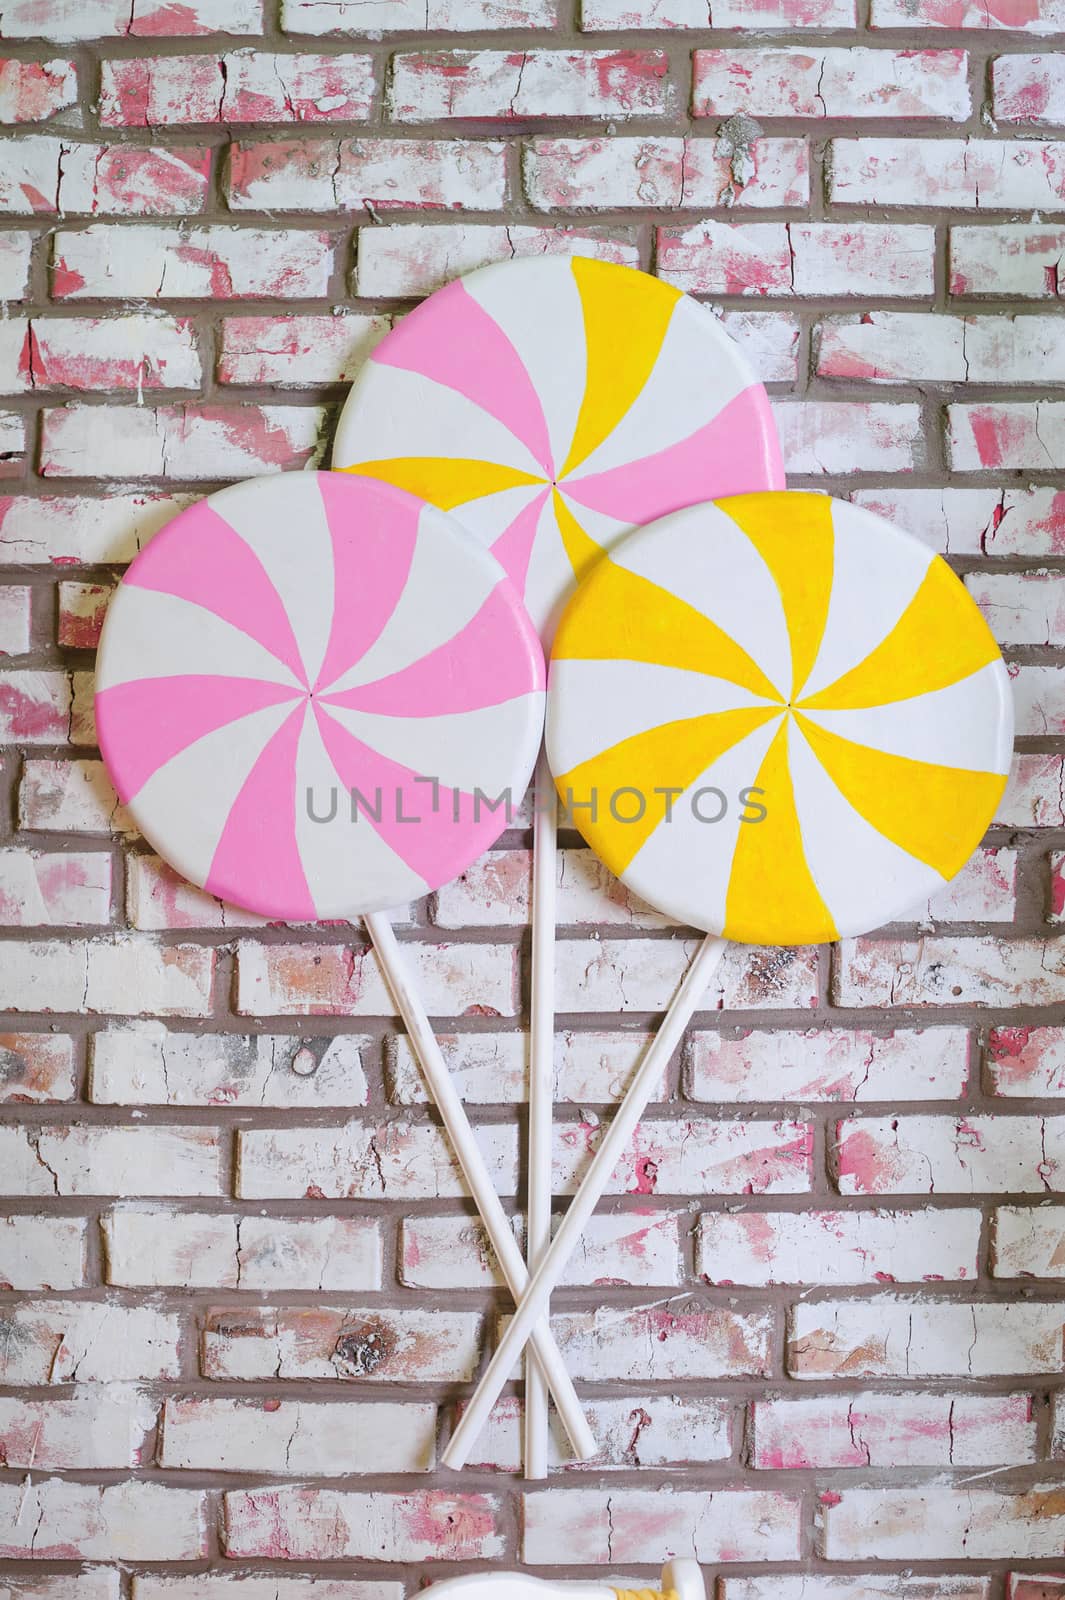 multi-colored lollypops at the brick wall background.